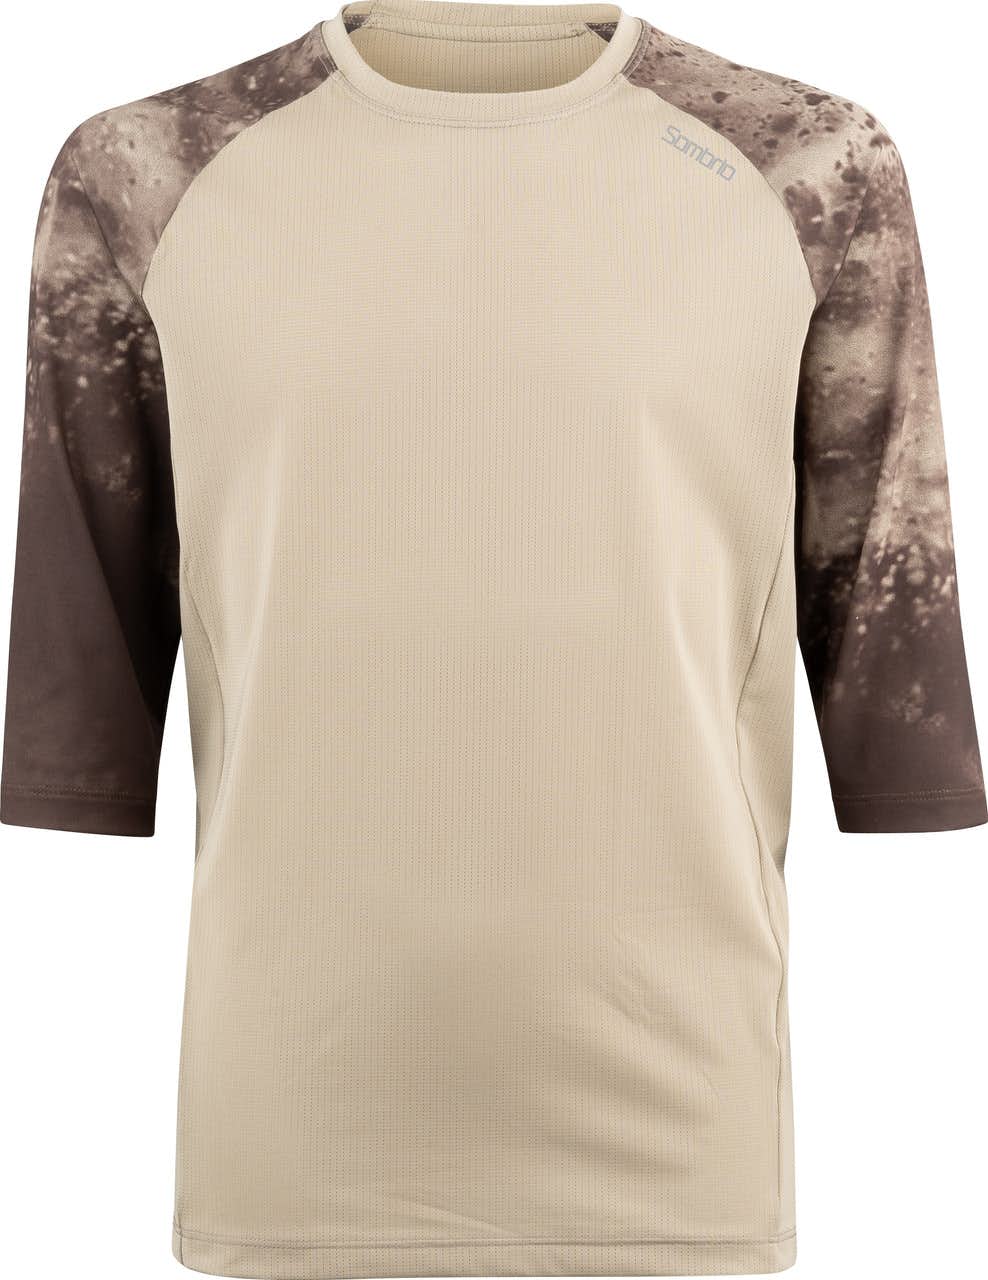 Grom's Altitude Jersey Dust Silver Sage/Rasted C